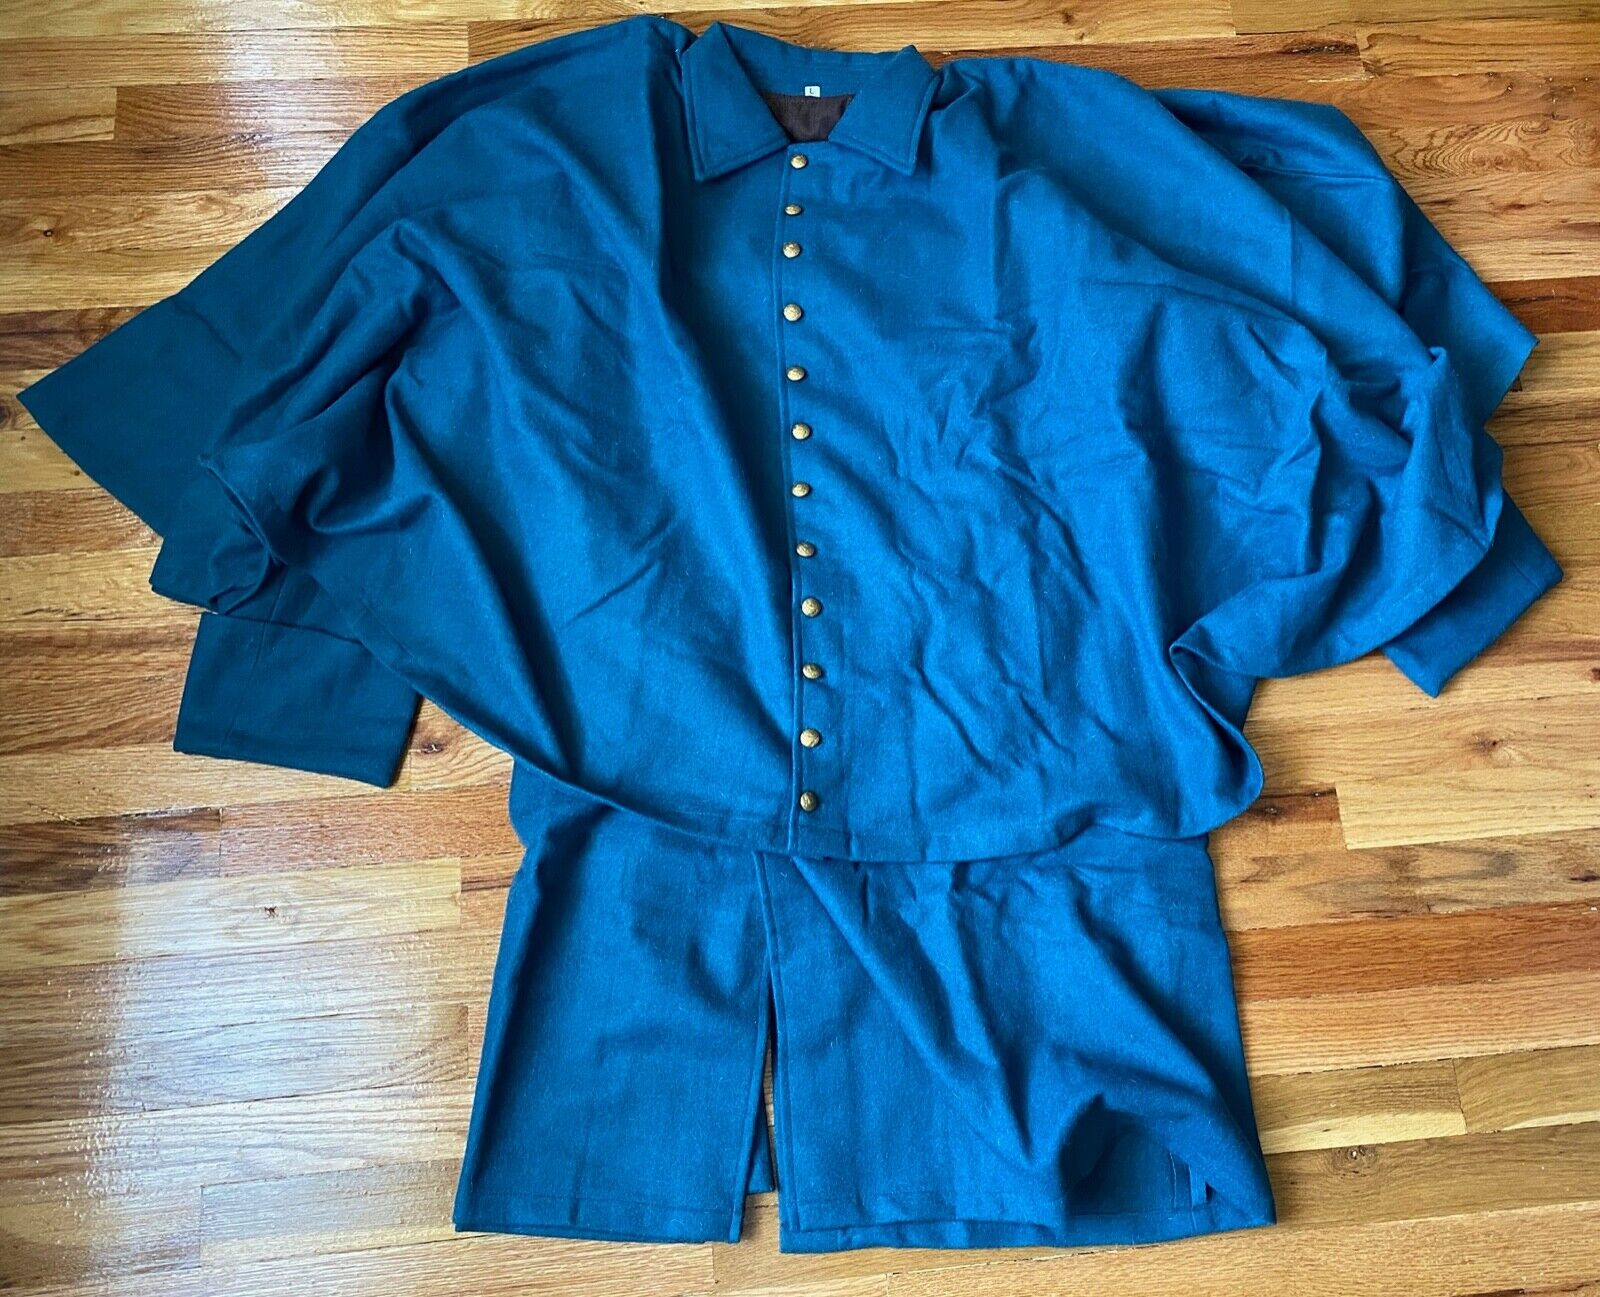 INDIAN WARS SPAN AM US ARMY M1872 ENLISTED GREATCOAT OVERCOAT- SIZE 3 (42-46R)